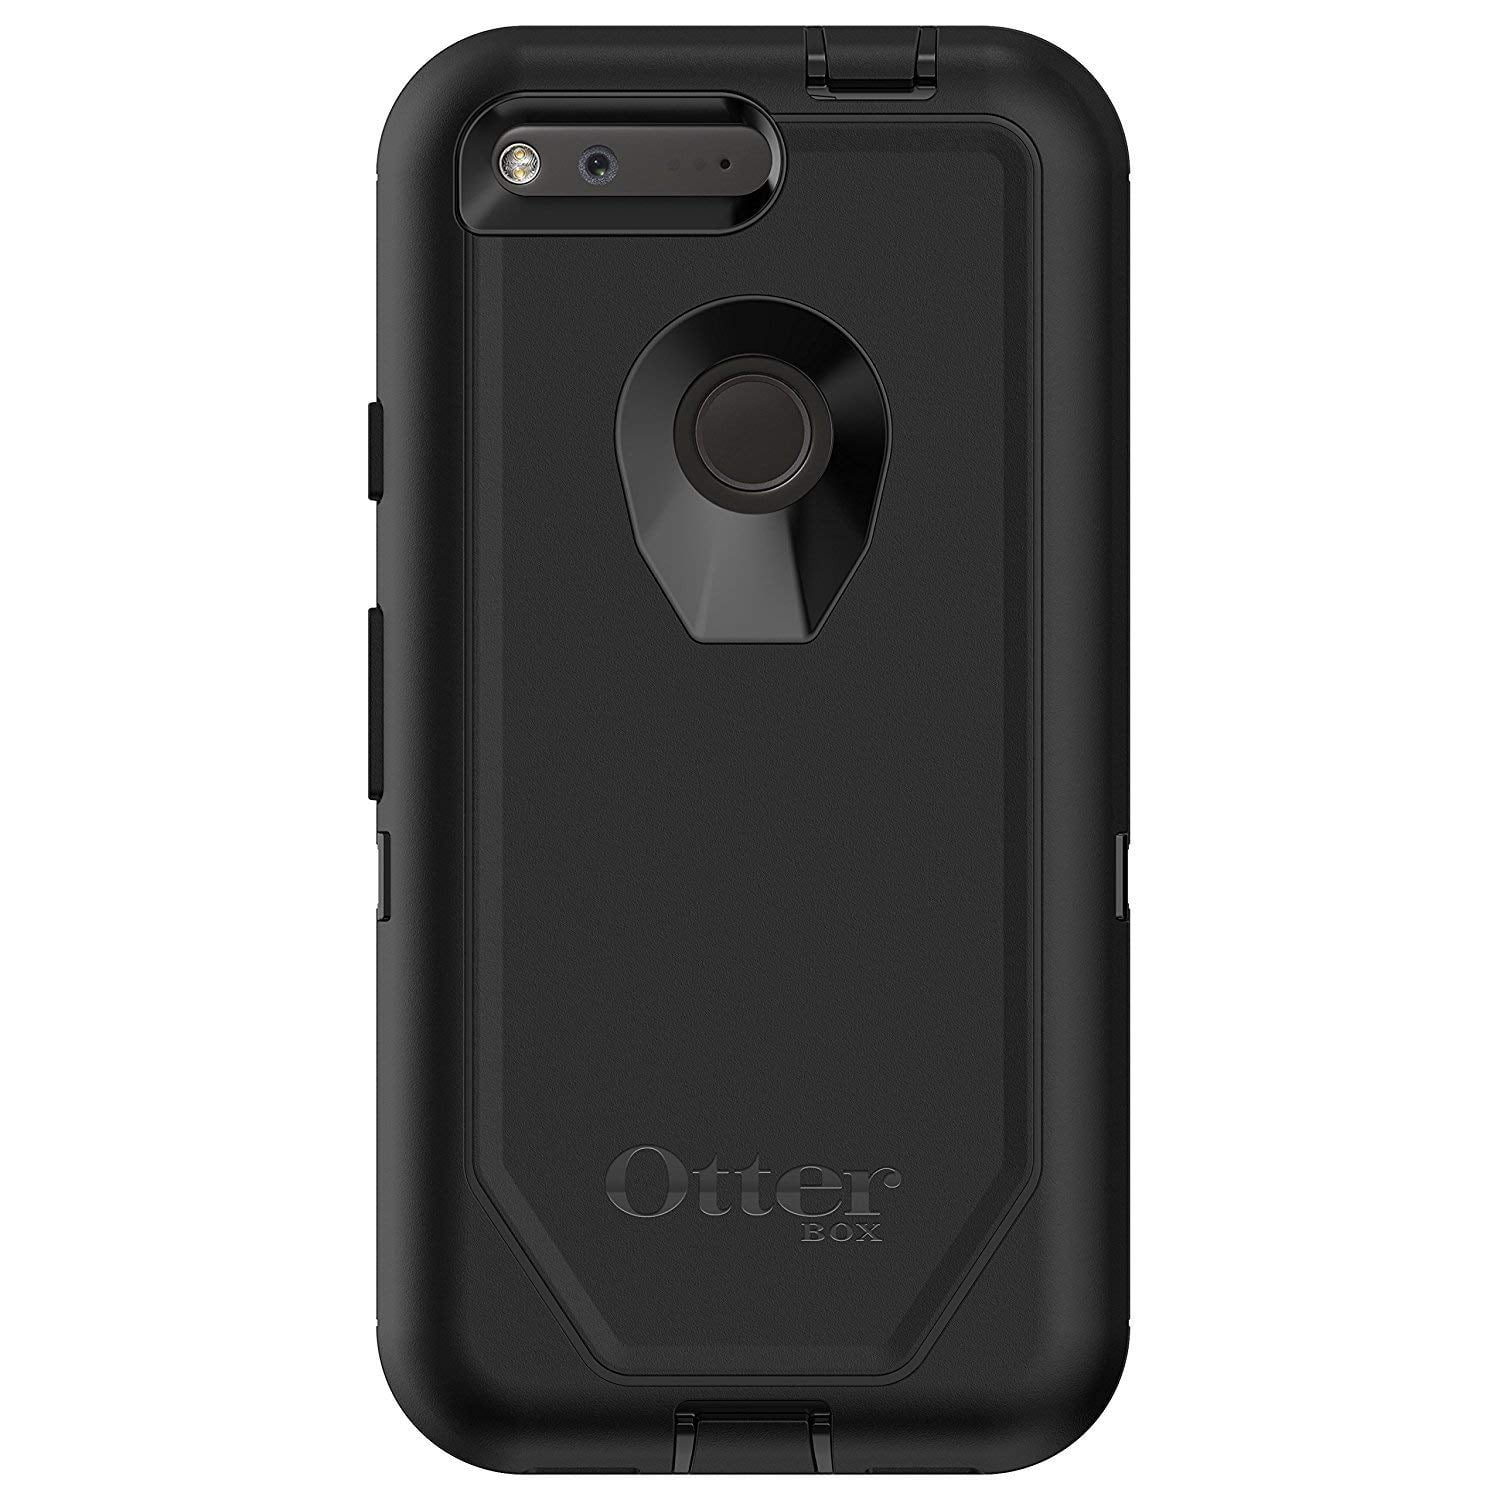 OtterBox Defender Series - Back cover for cell phone - rugged 